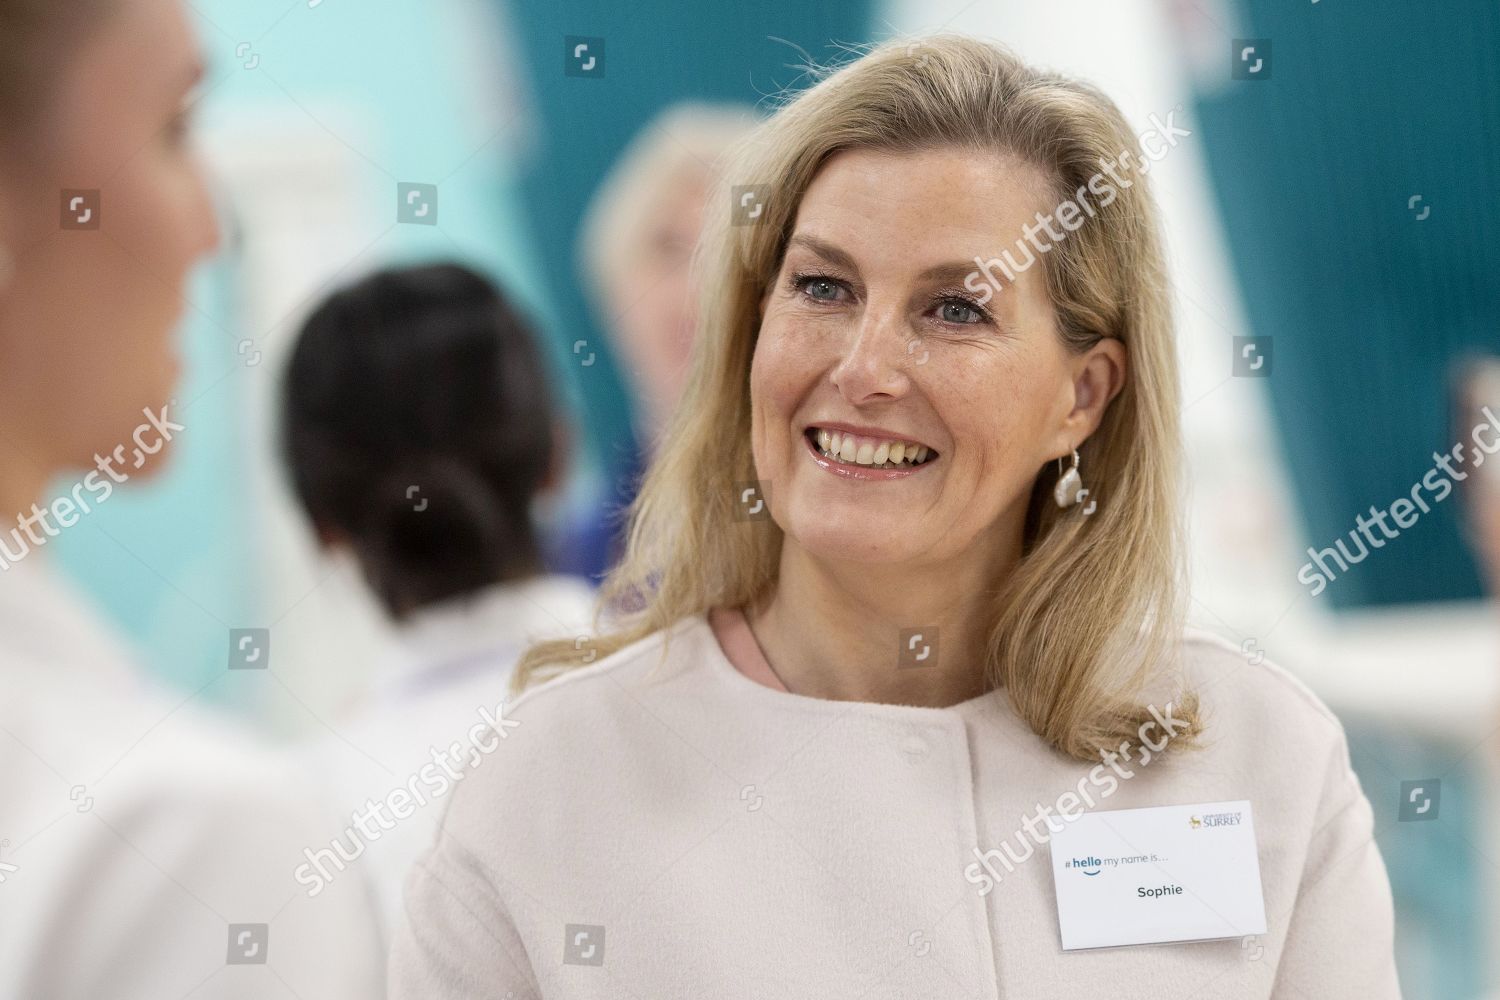 sophie-countess-of-wessex-opens-new-health-sciences-institute-university-of-surrey-guildford-uk-shutterstock-editorial-10542421au.jpg